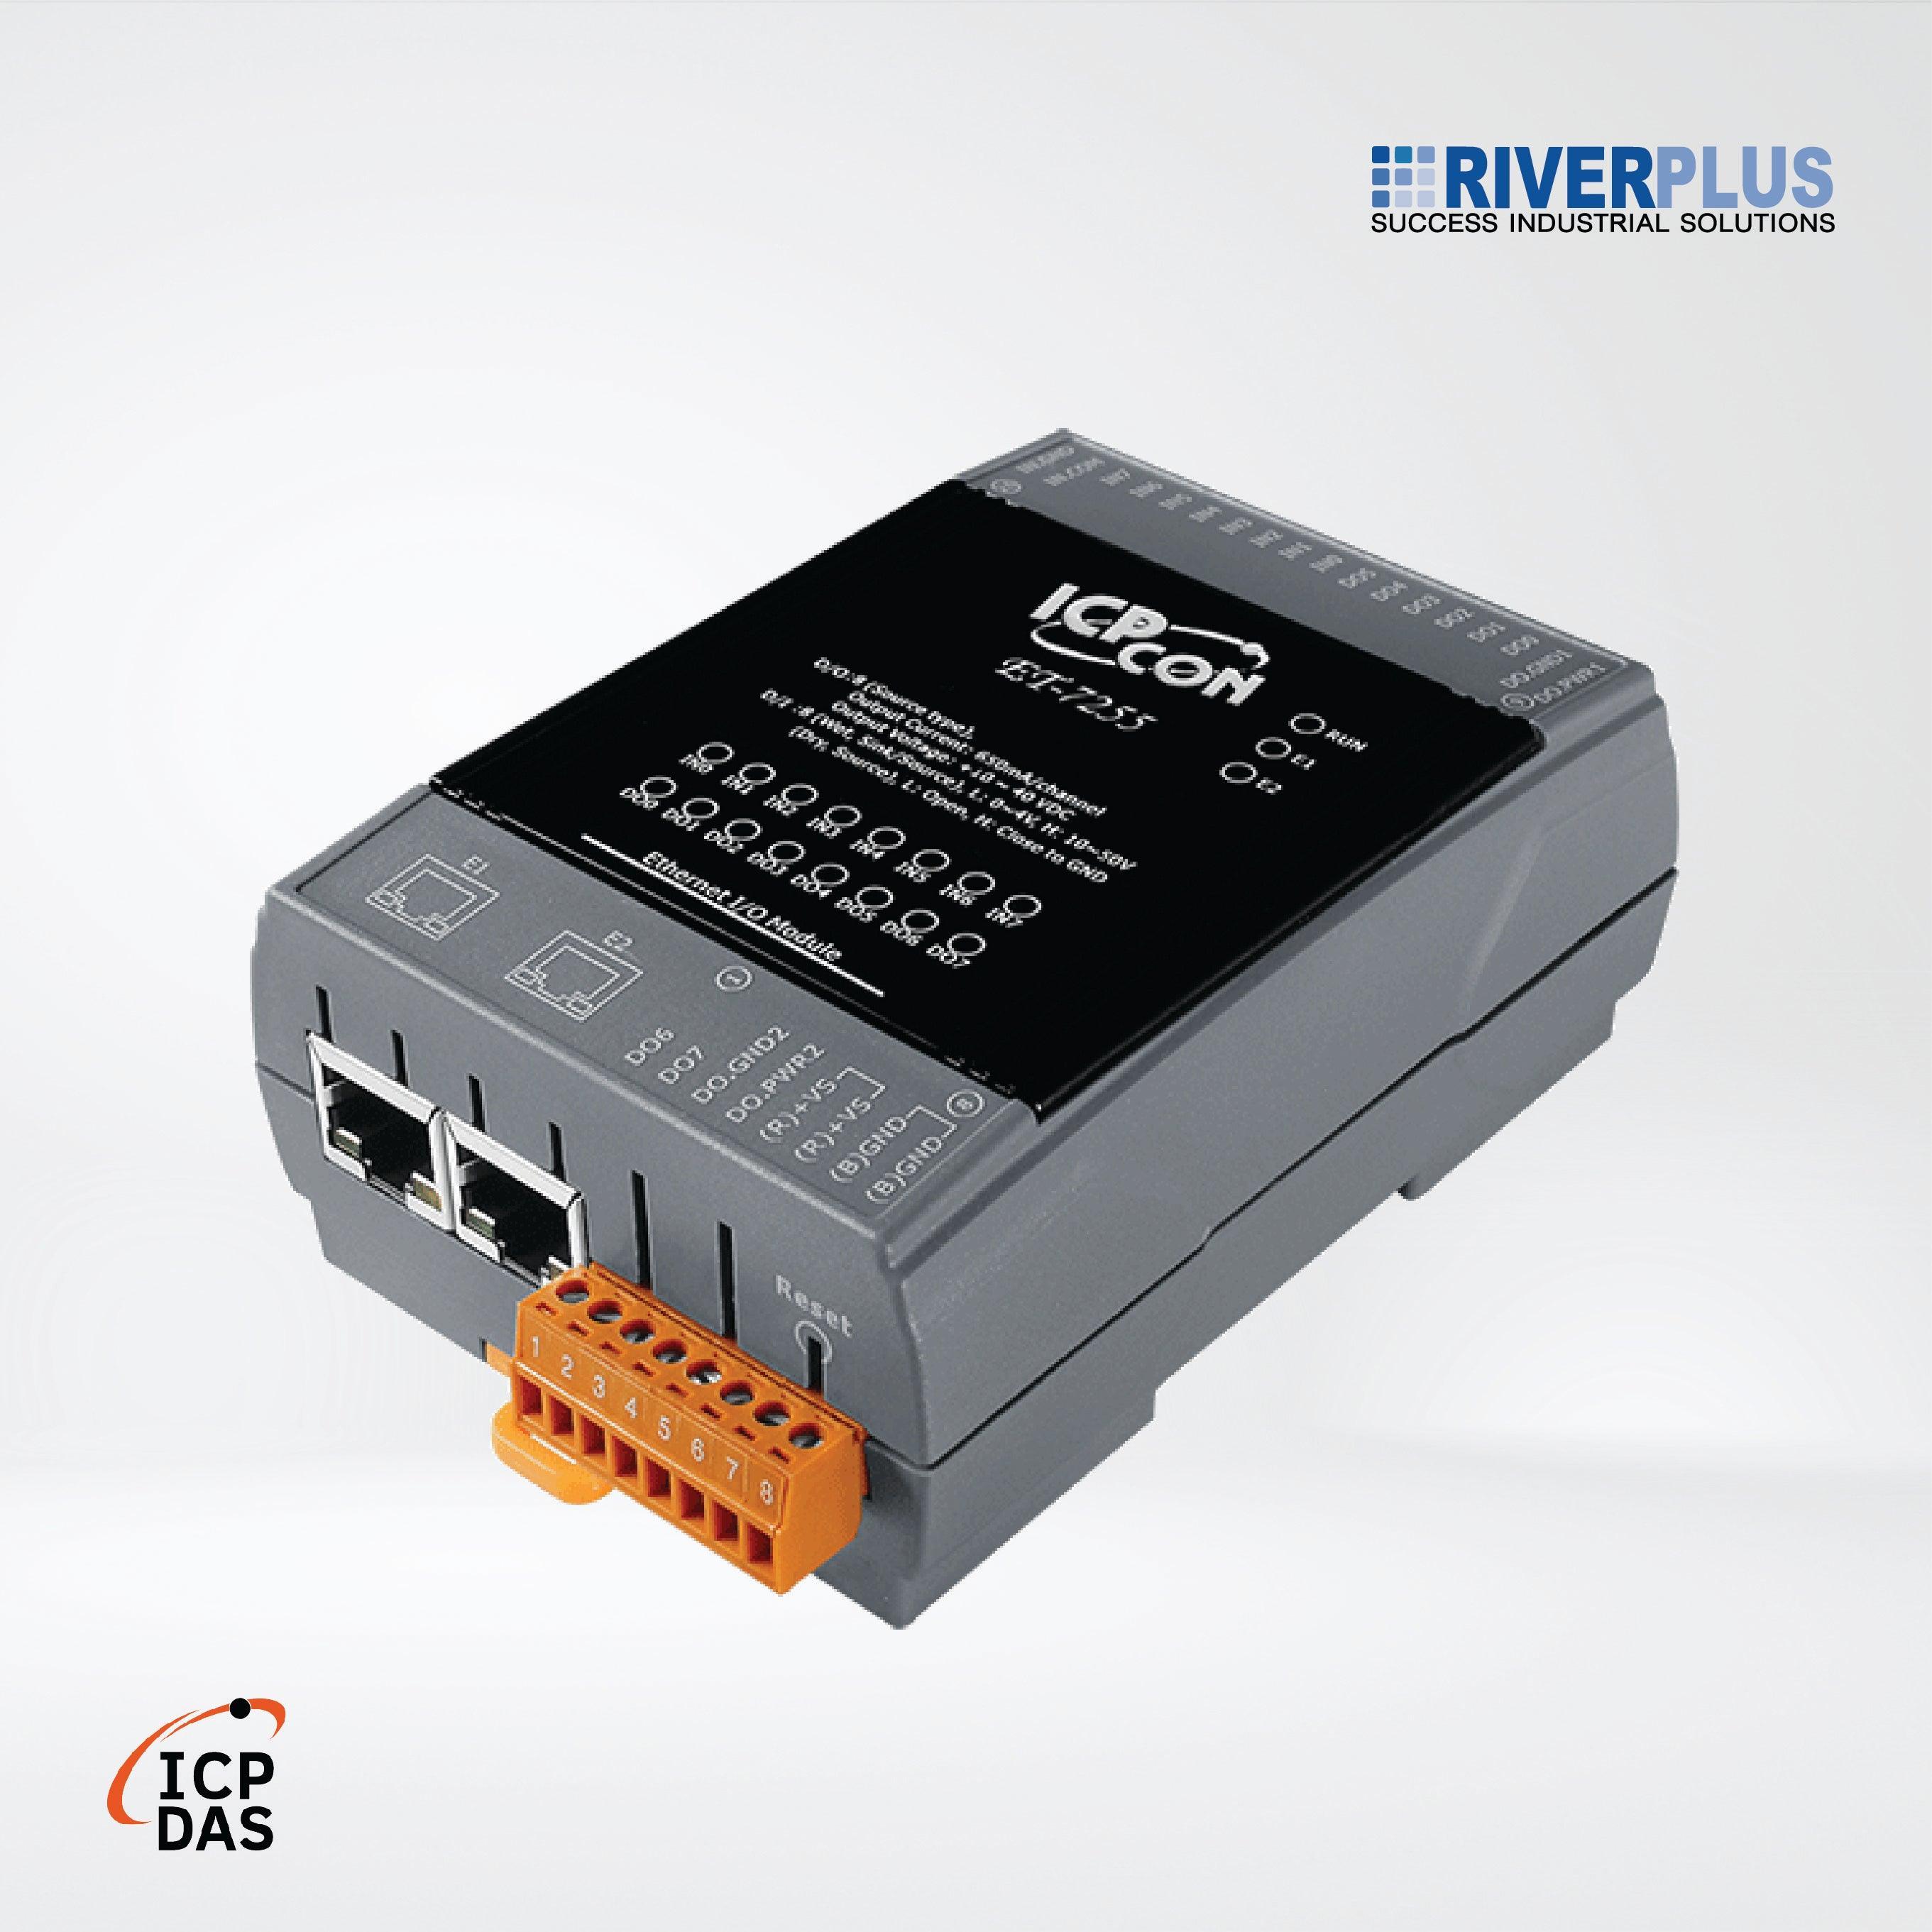 ET-7255 Ethernet I/O Module 2-port Ethernet Switch, 8-ch DI and 8-ch DO - Riverplus